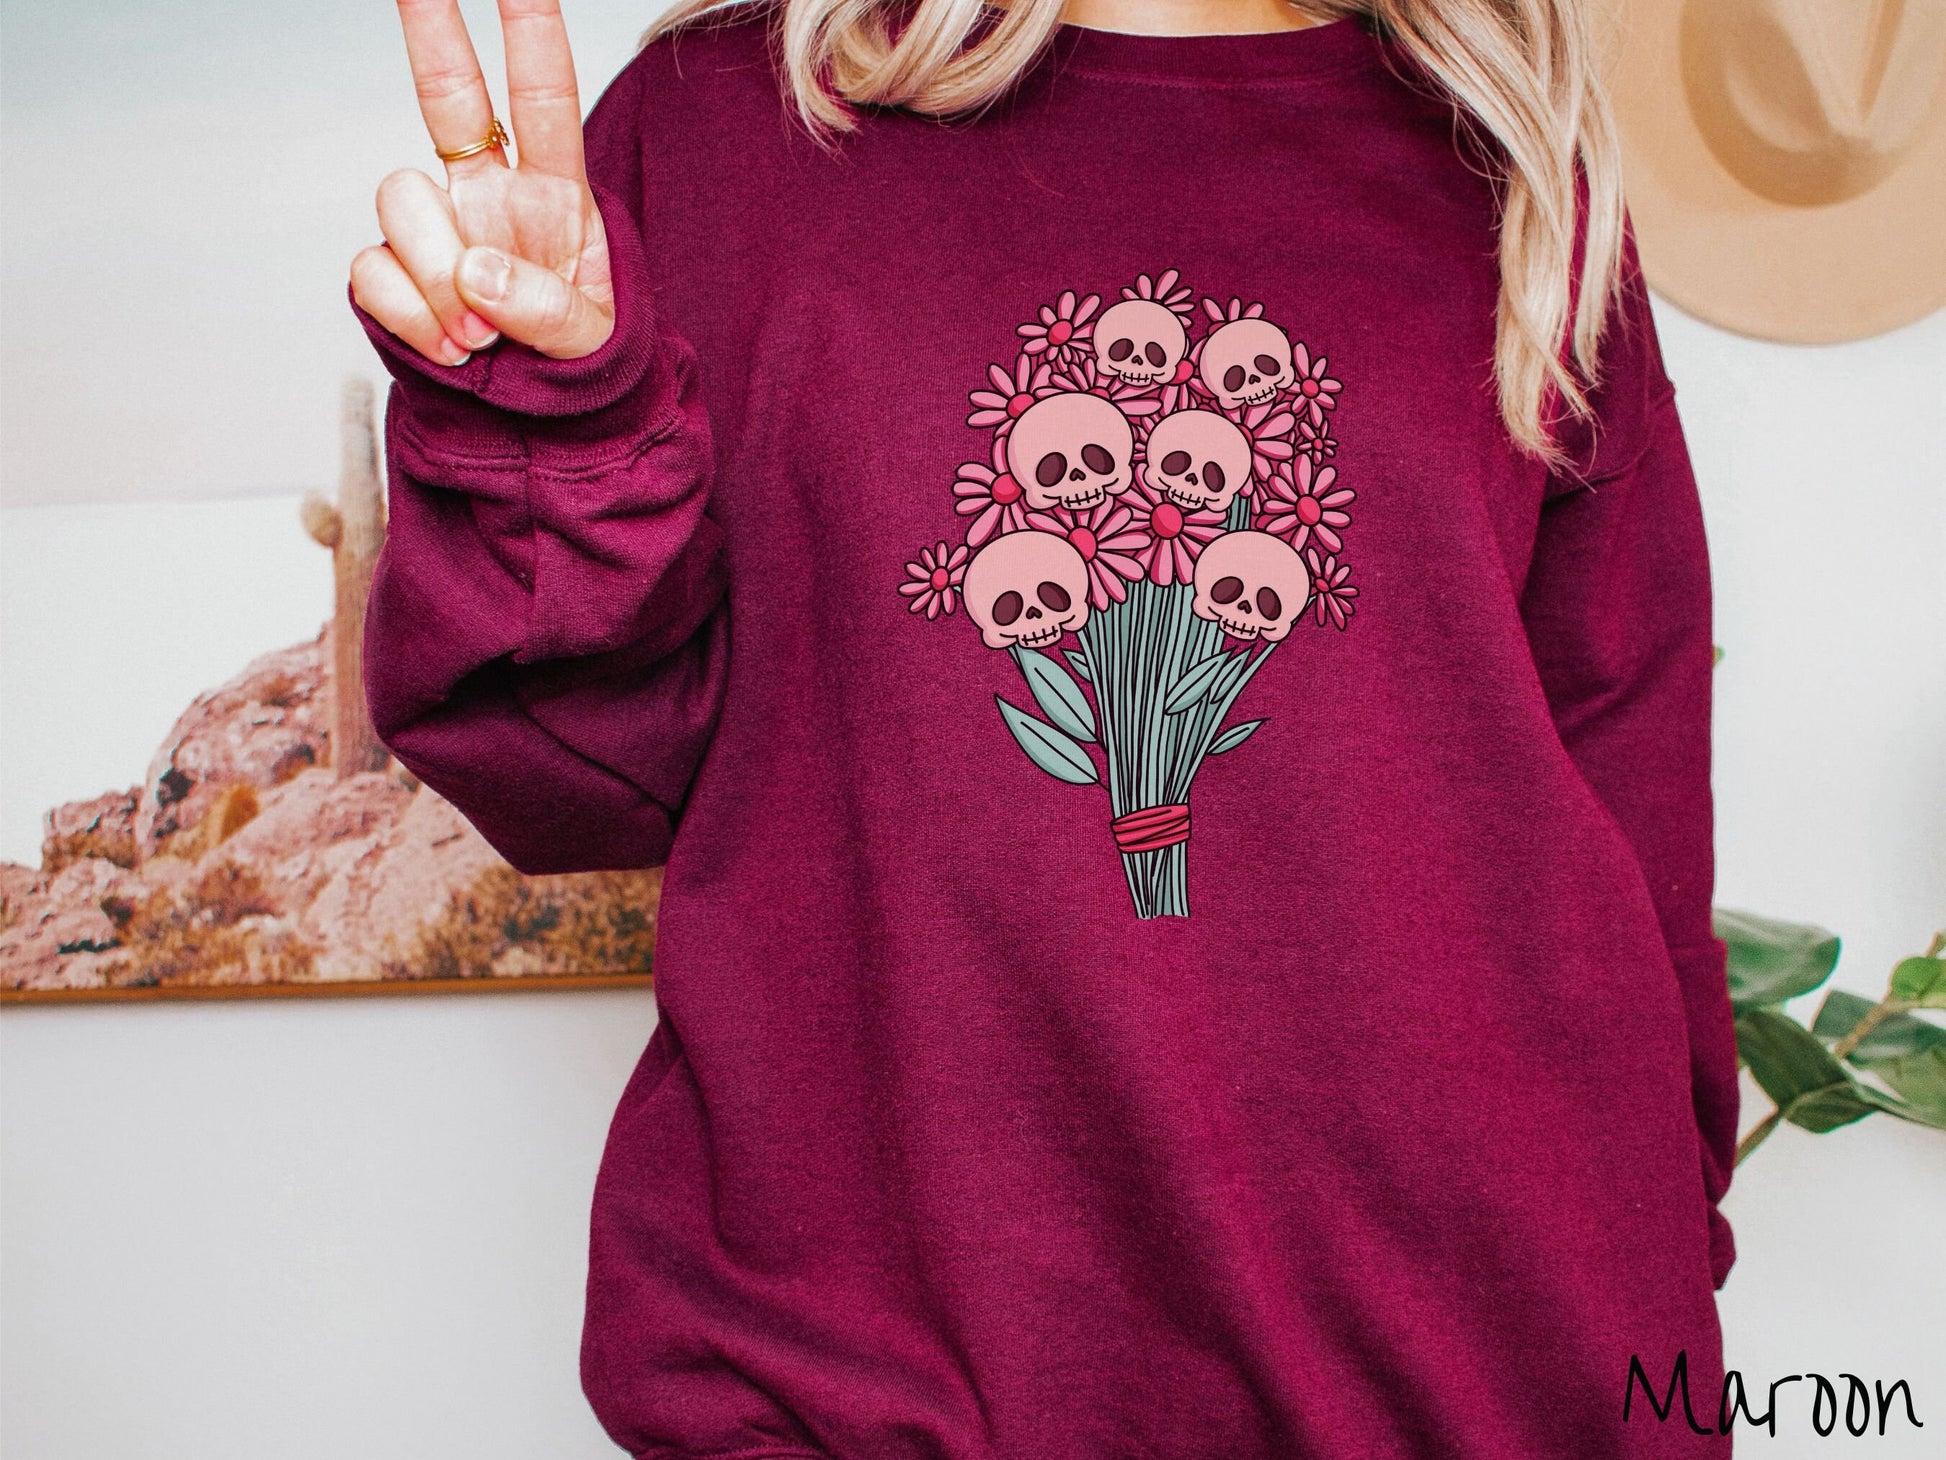 A woman wearing a cute maroon colored sweatshirt with a spooky flower bouquet with skull heads as the flowers among pink colored flowers.